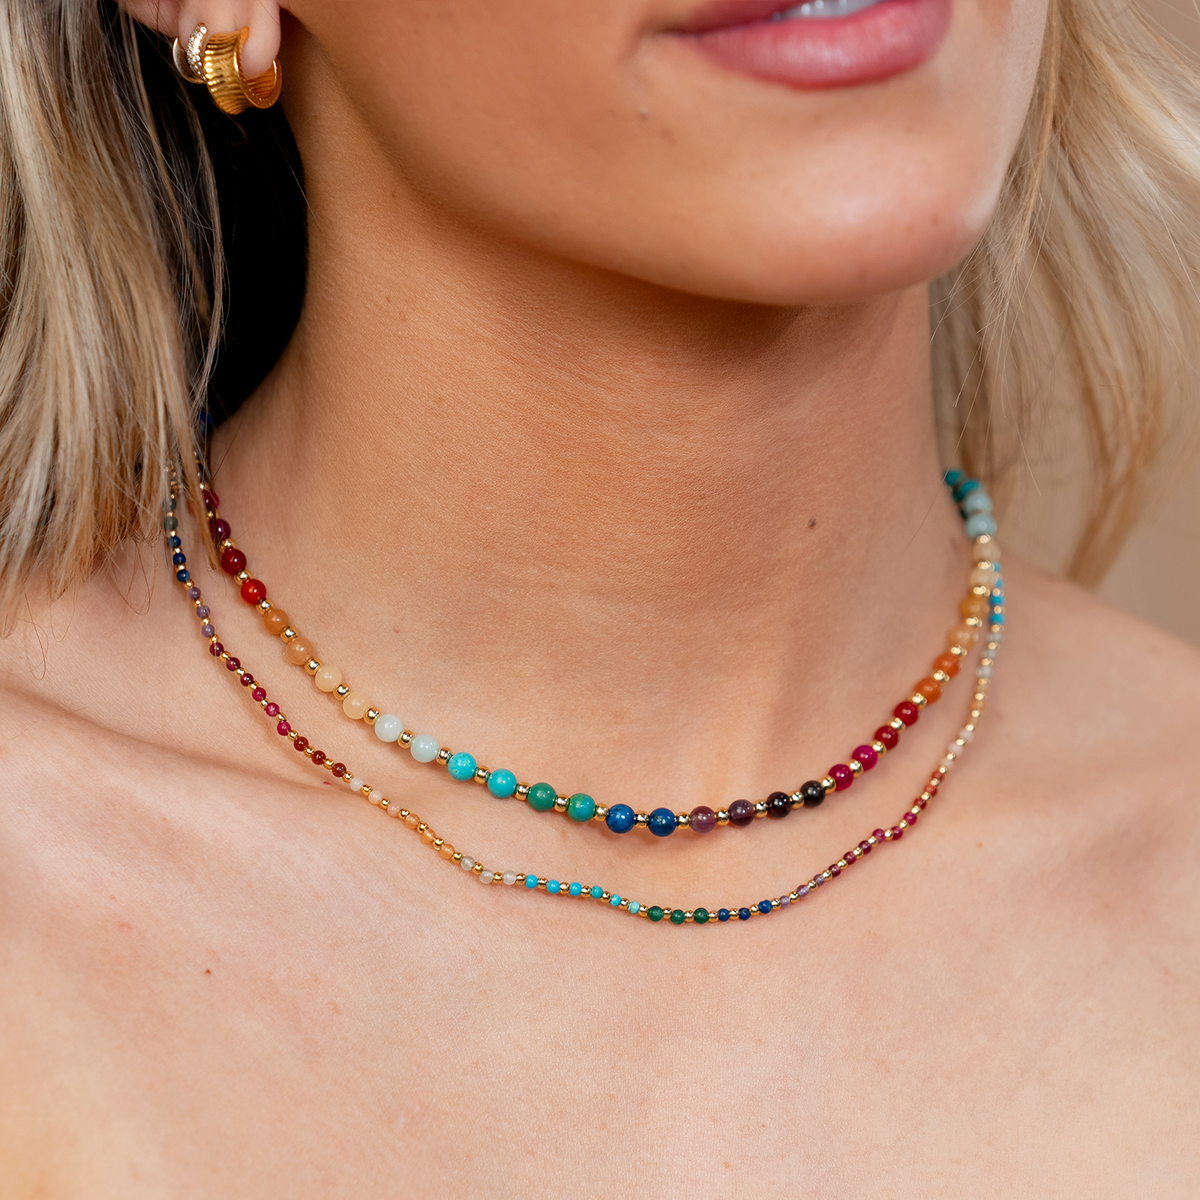 Model wearing a necklace stack. The necklaces include a 2mm multicolor stone and gold bead healing necklace and a 4mm multicolor stone and gold bead healing necklace